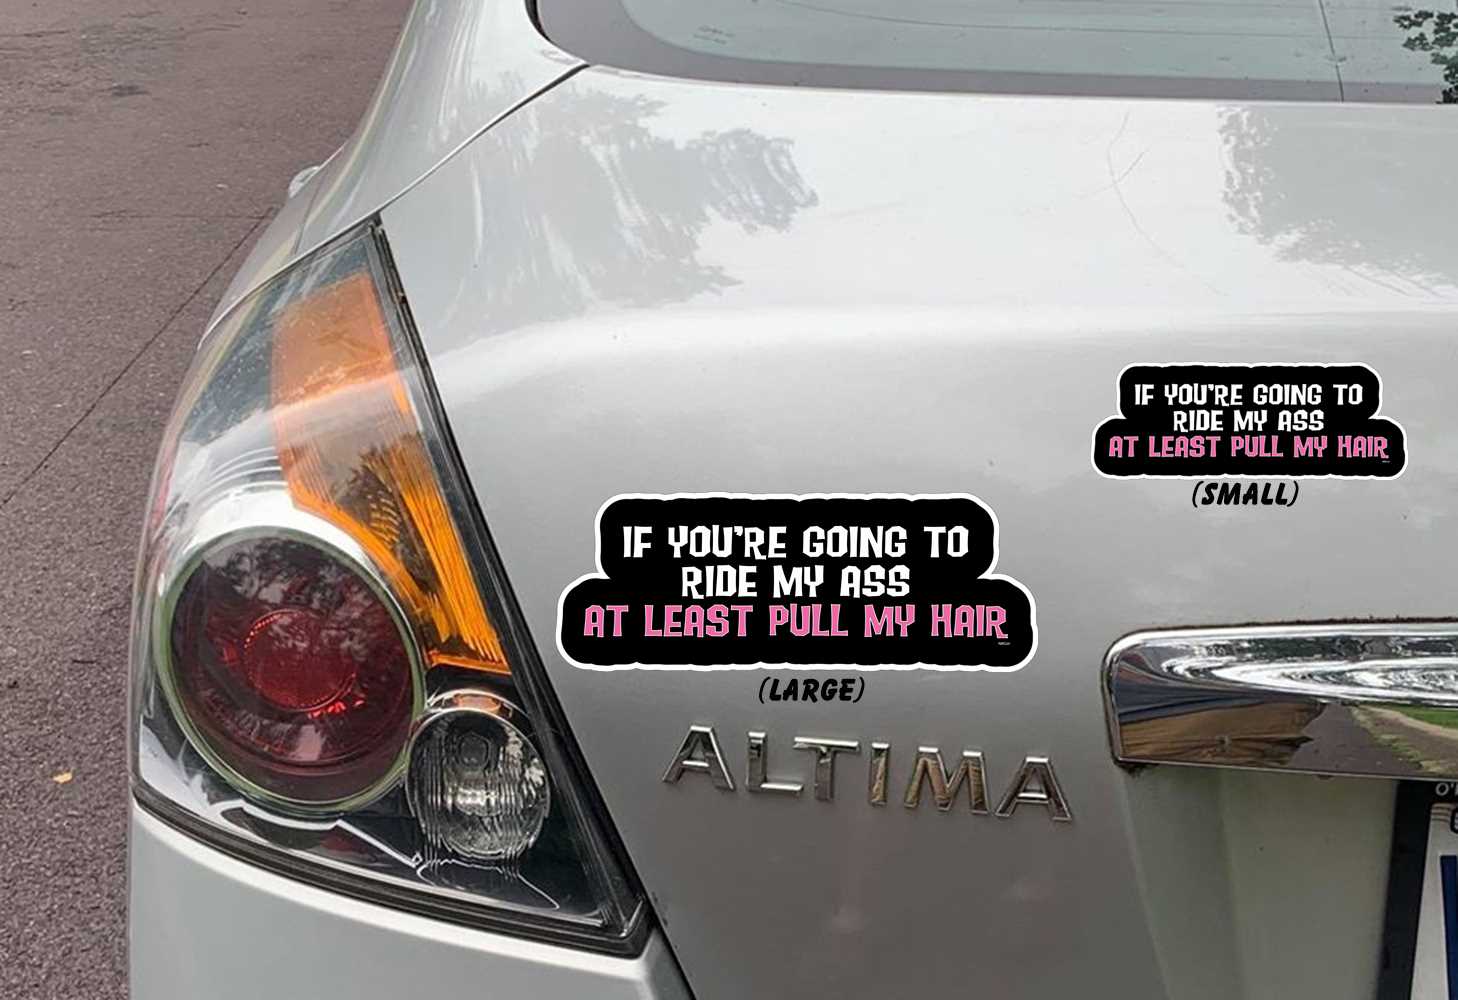 YOU'RE GOING TO RIDE MY ASS, AT LEAST PULL MY HAIR BUMPER STICKERS ON CAR